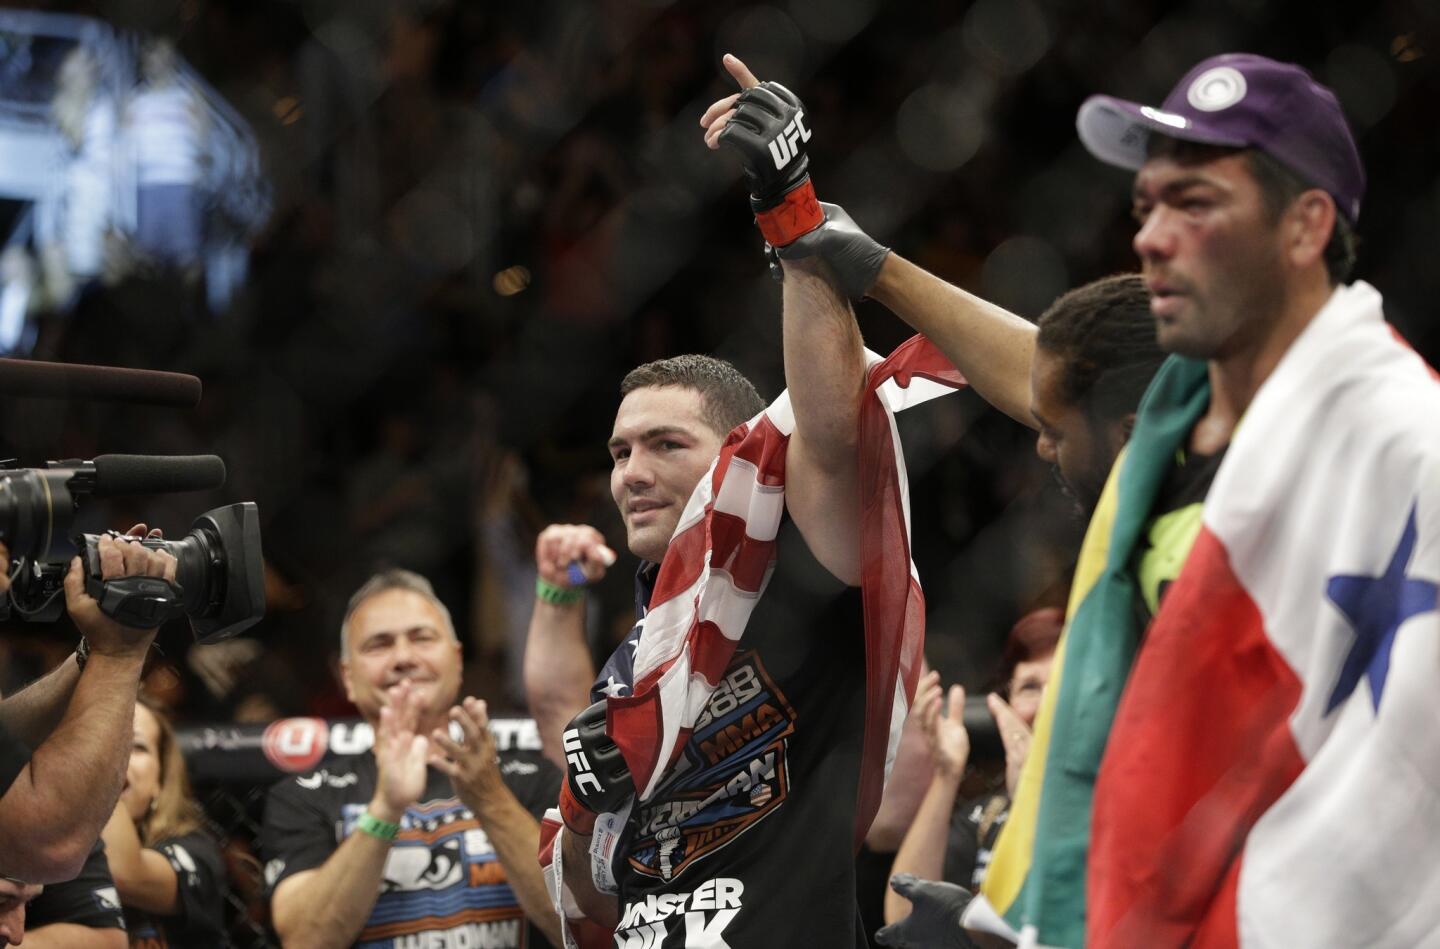 Chris Weidman raises his hand in victory after defending his UFC middleweight belt against Lyoto Machida.